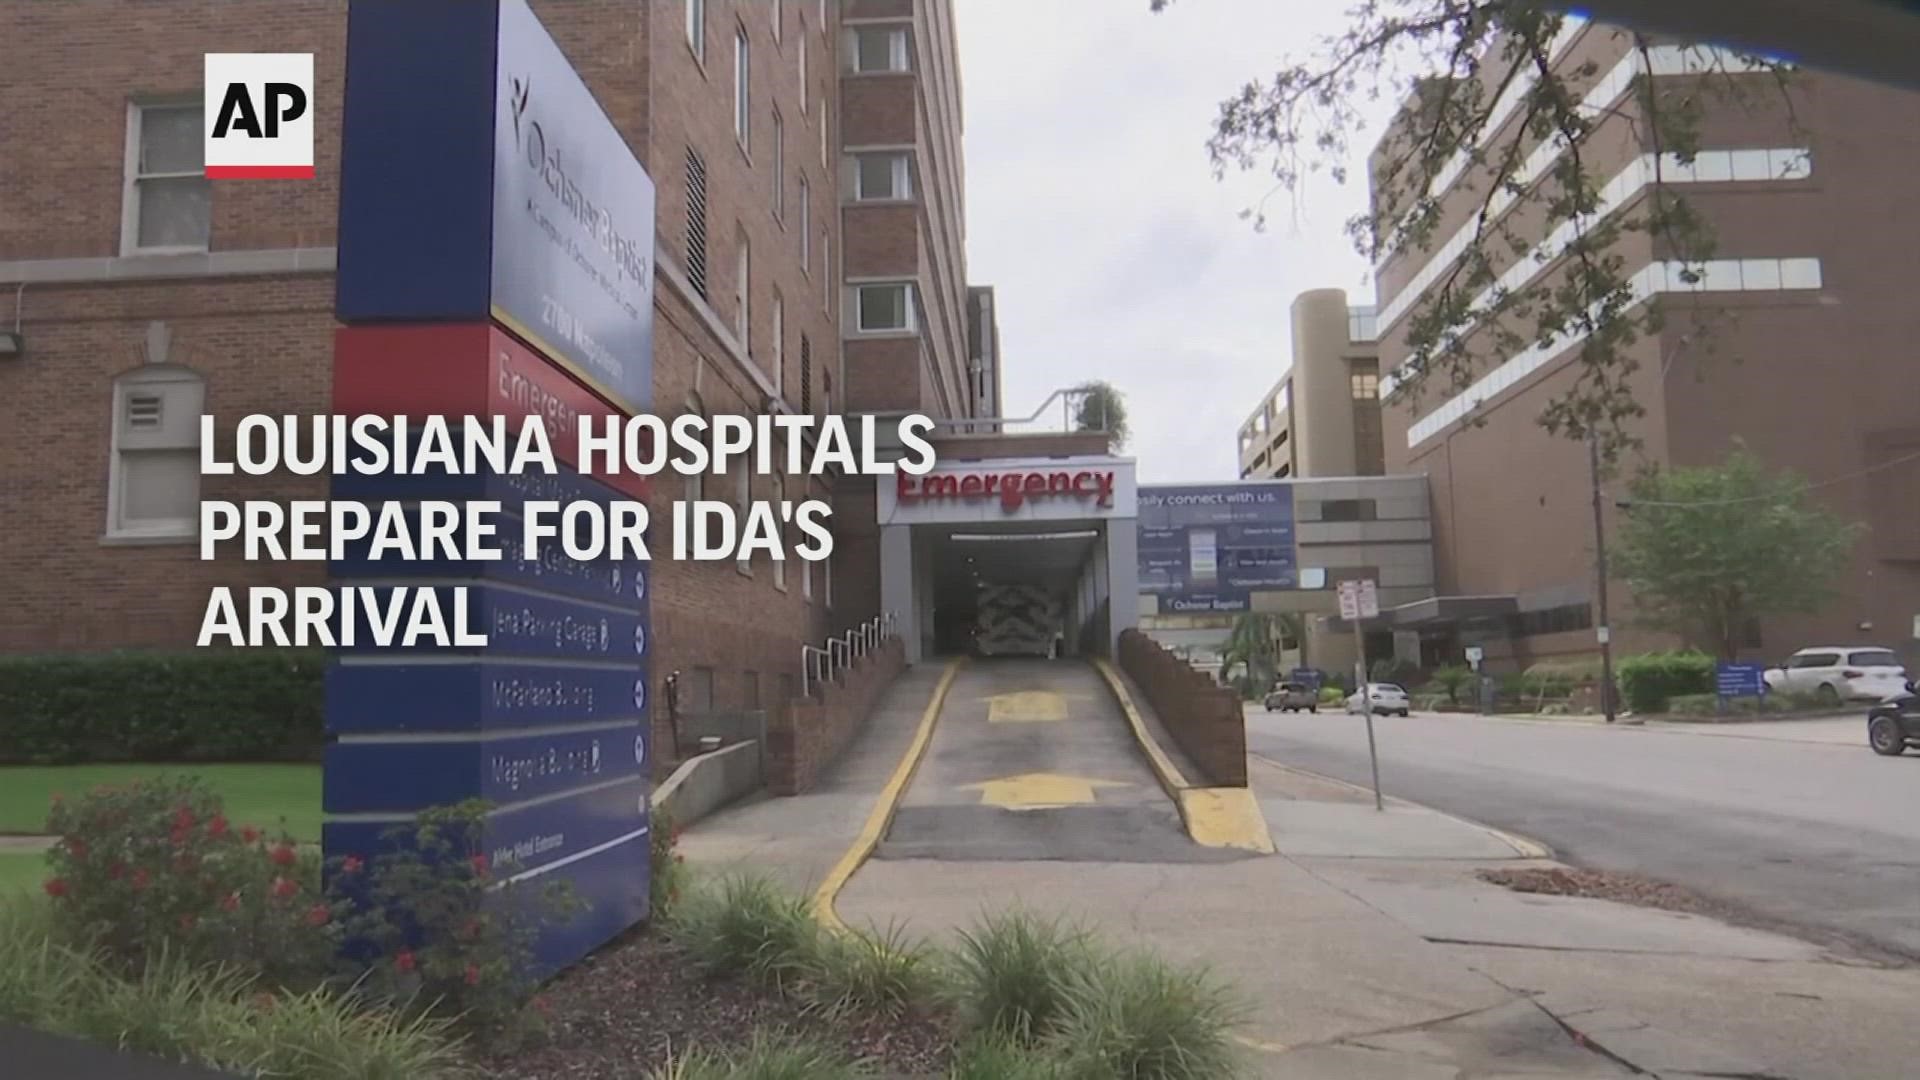 Louisiana's largest hospital system, Ochsner Health, has equipped its hospitals with generators and boilers to ensure hot water and power as Ida nears